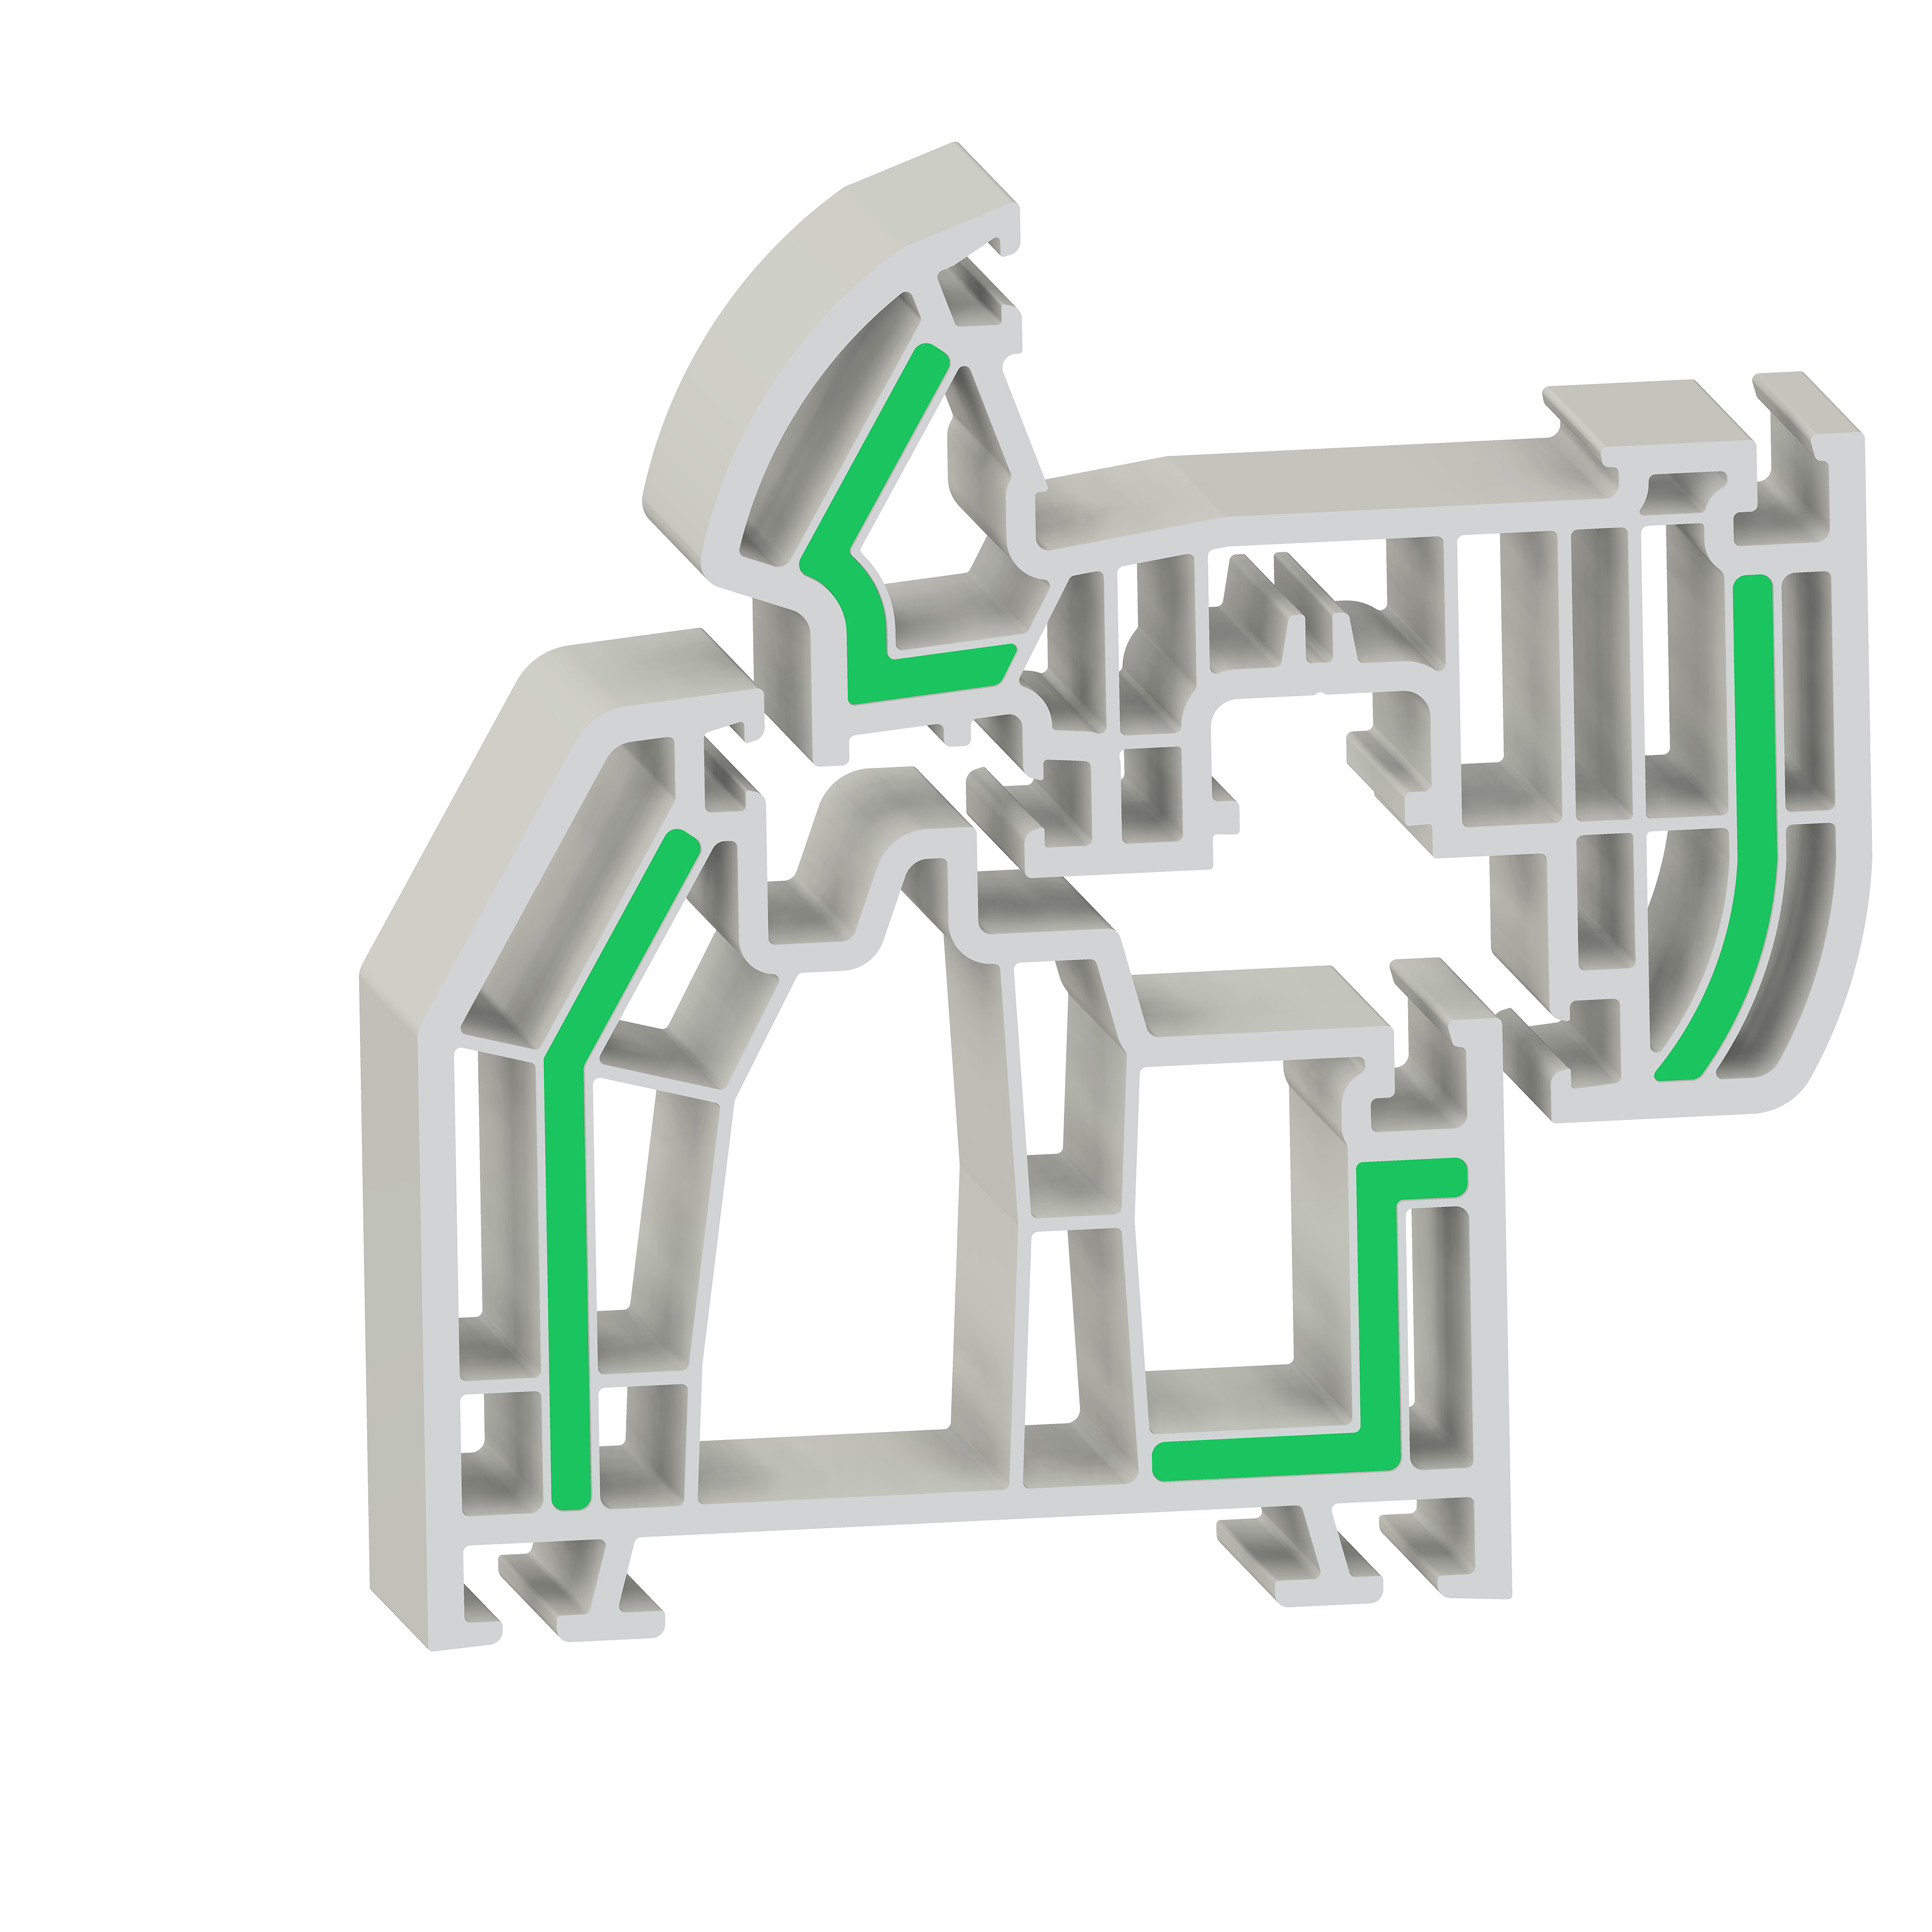 Ultradur (green) in a PVC window profile, produced in the co-extrusion process.